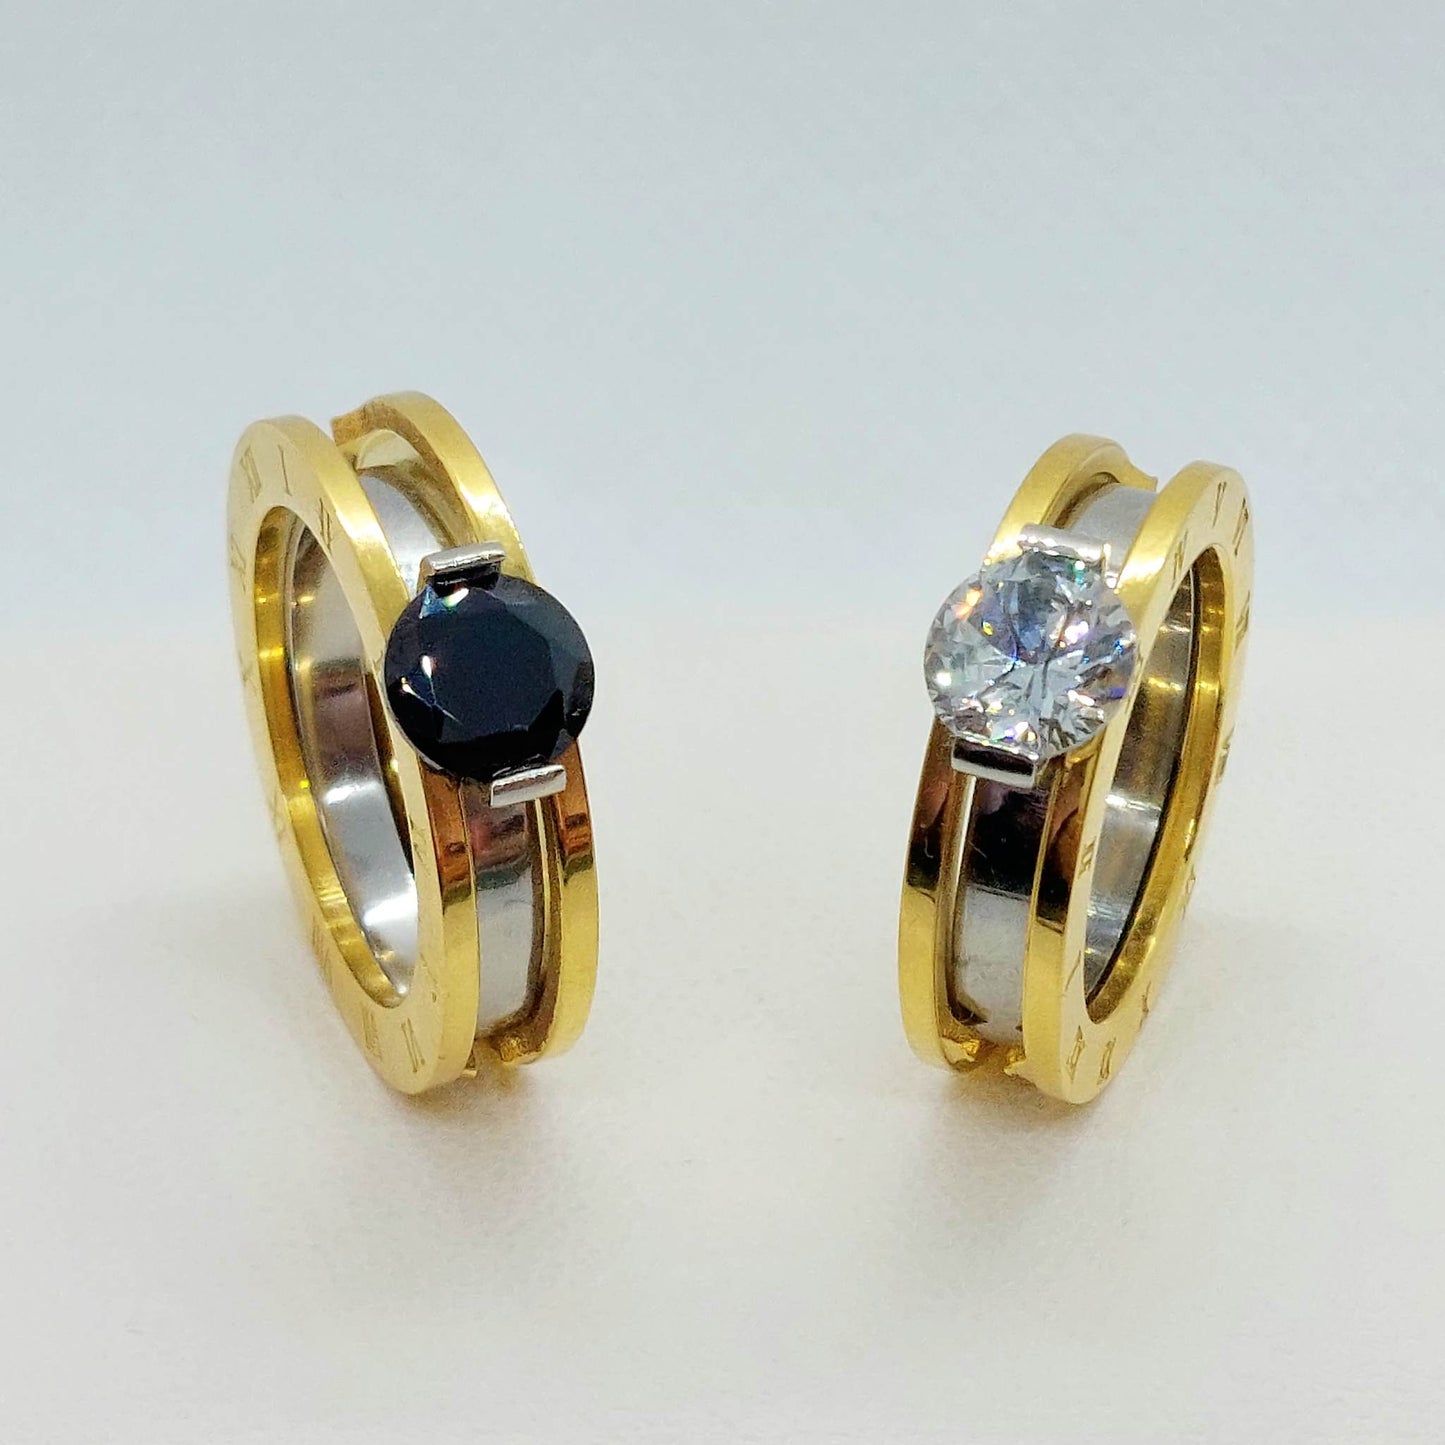 Two-in-one Zircon Ring in Stainless Steel